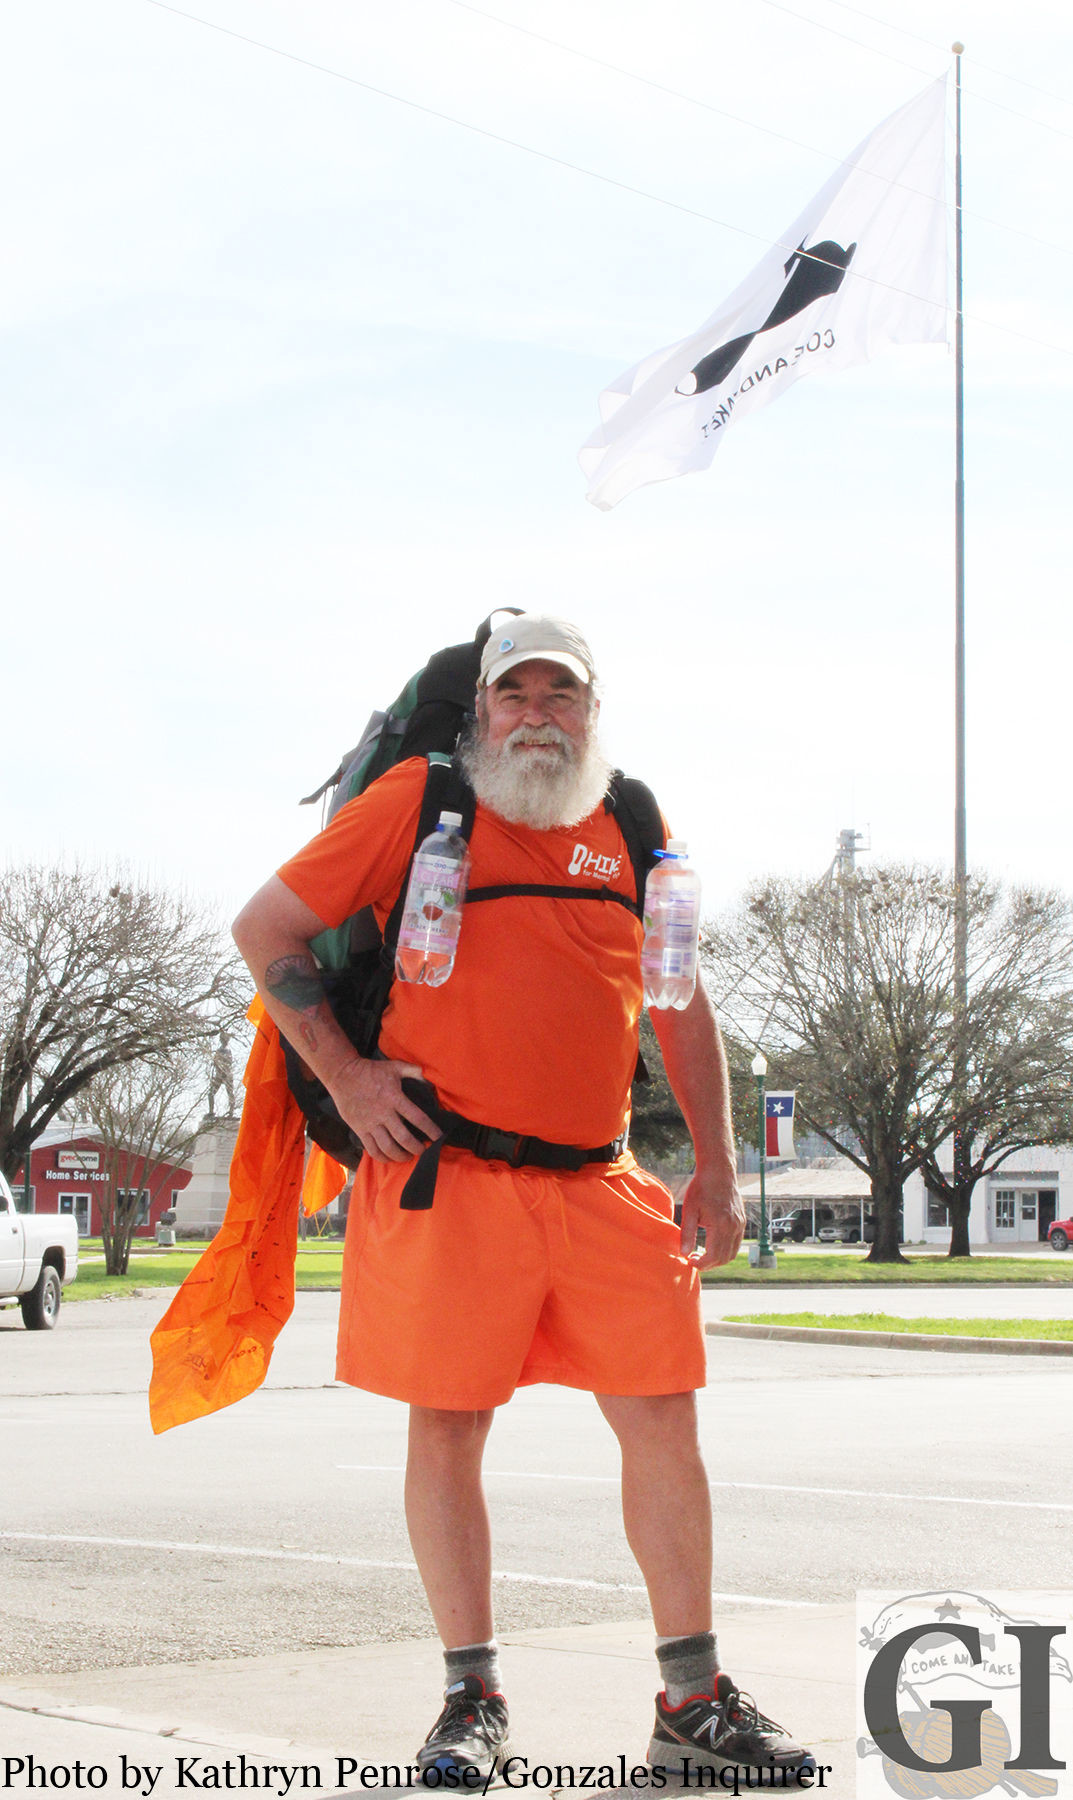 Tom Kennedy, co-founder of HIKE for Mental Health, stopped in Gonzales on his 300-mile trek from covering Houston, San Antonio and finally Austin, where he hopes to meet with Texas lawmakers to discuss stigma awareness.